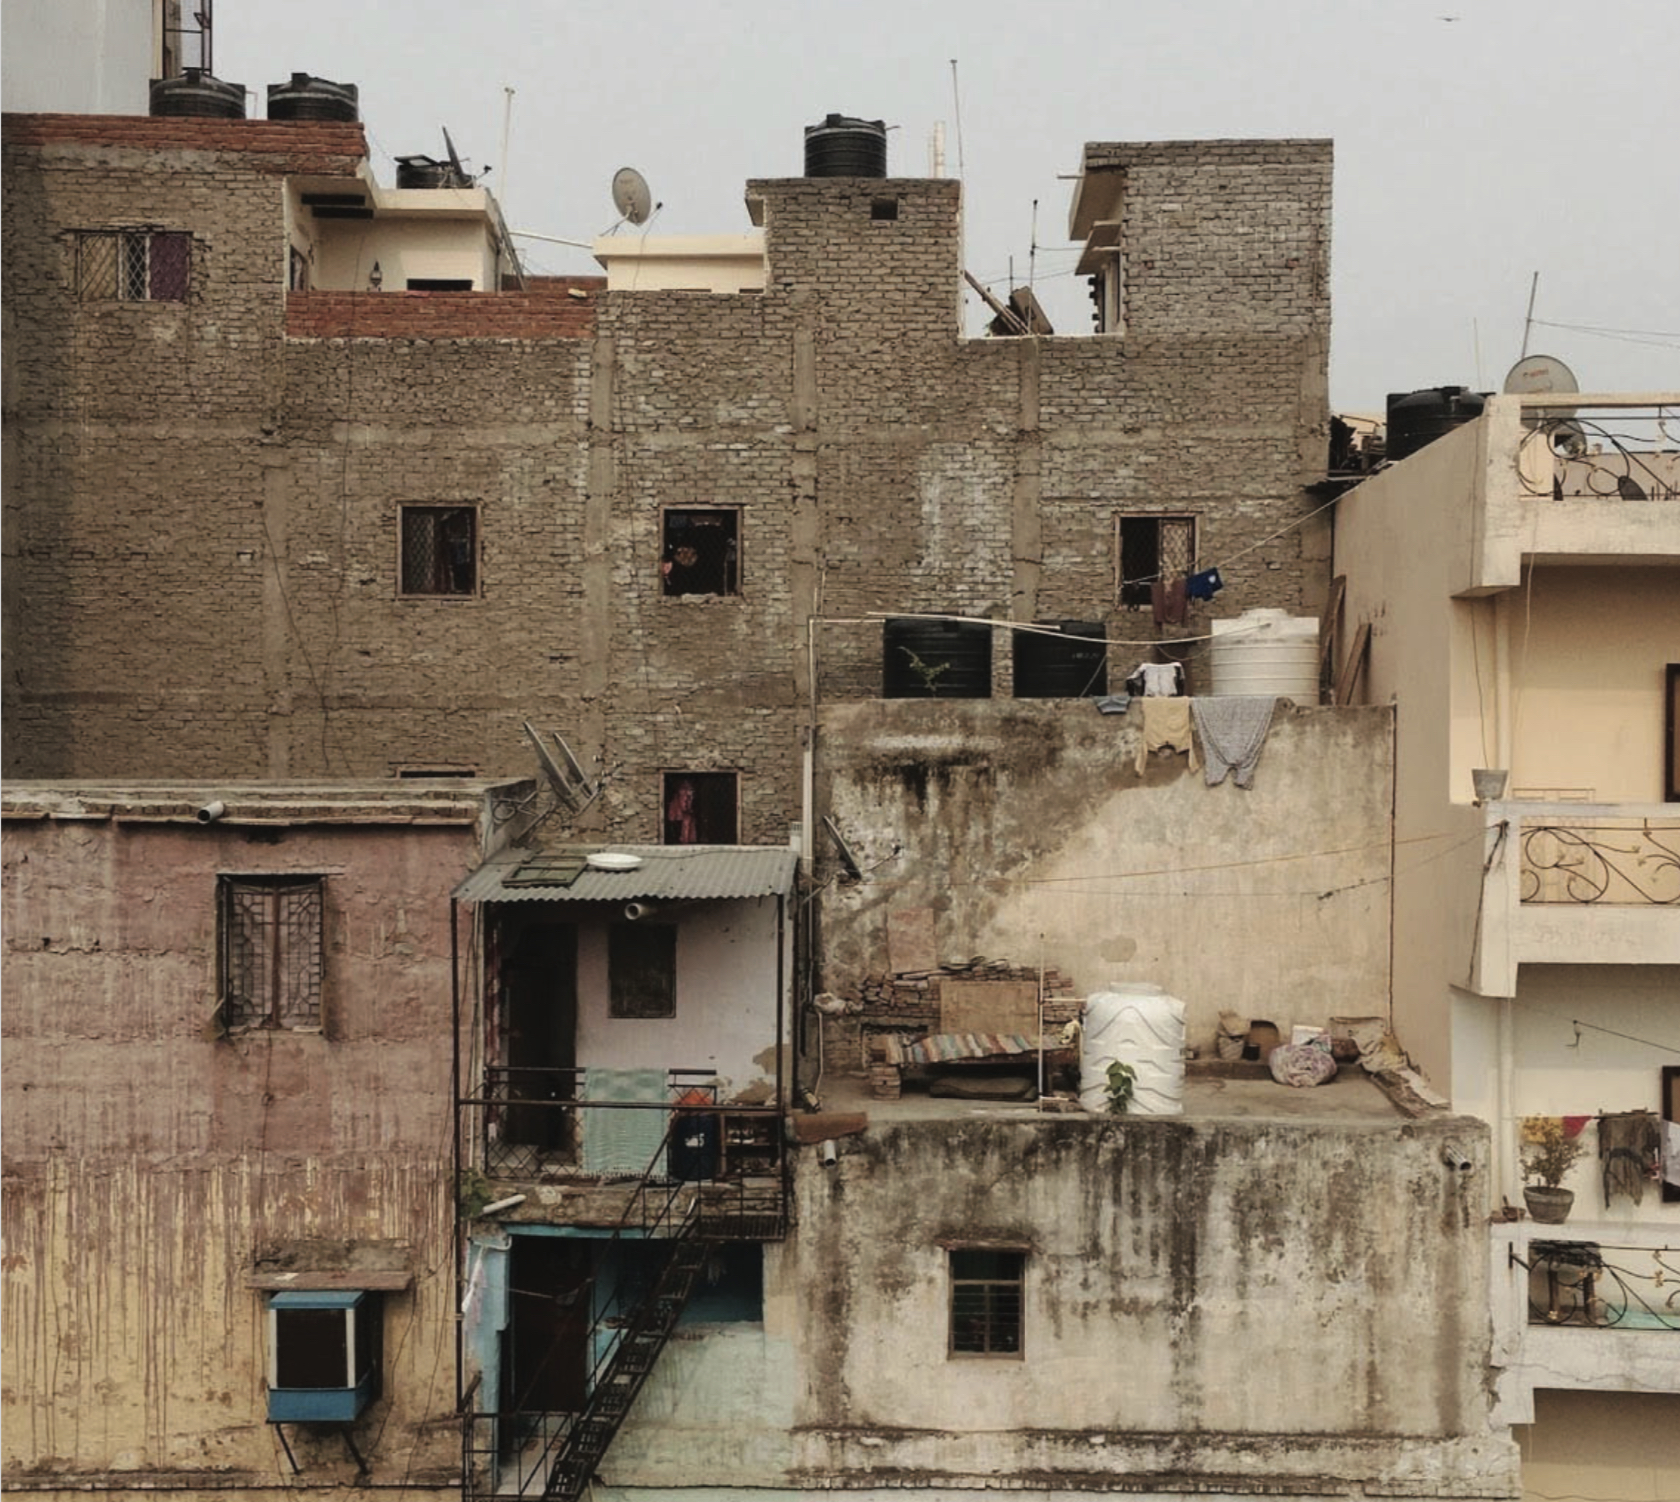 Photograph of informal settlements in India